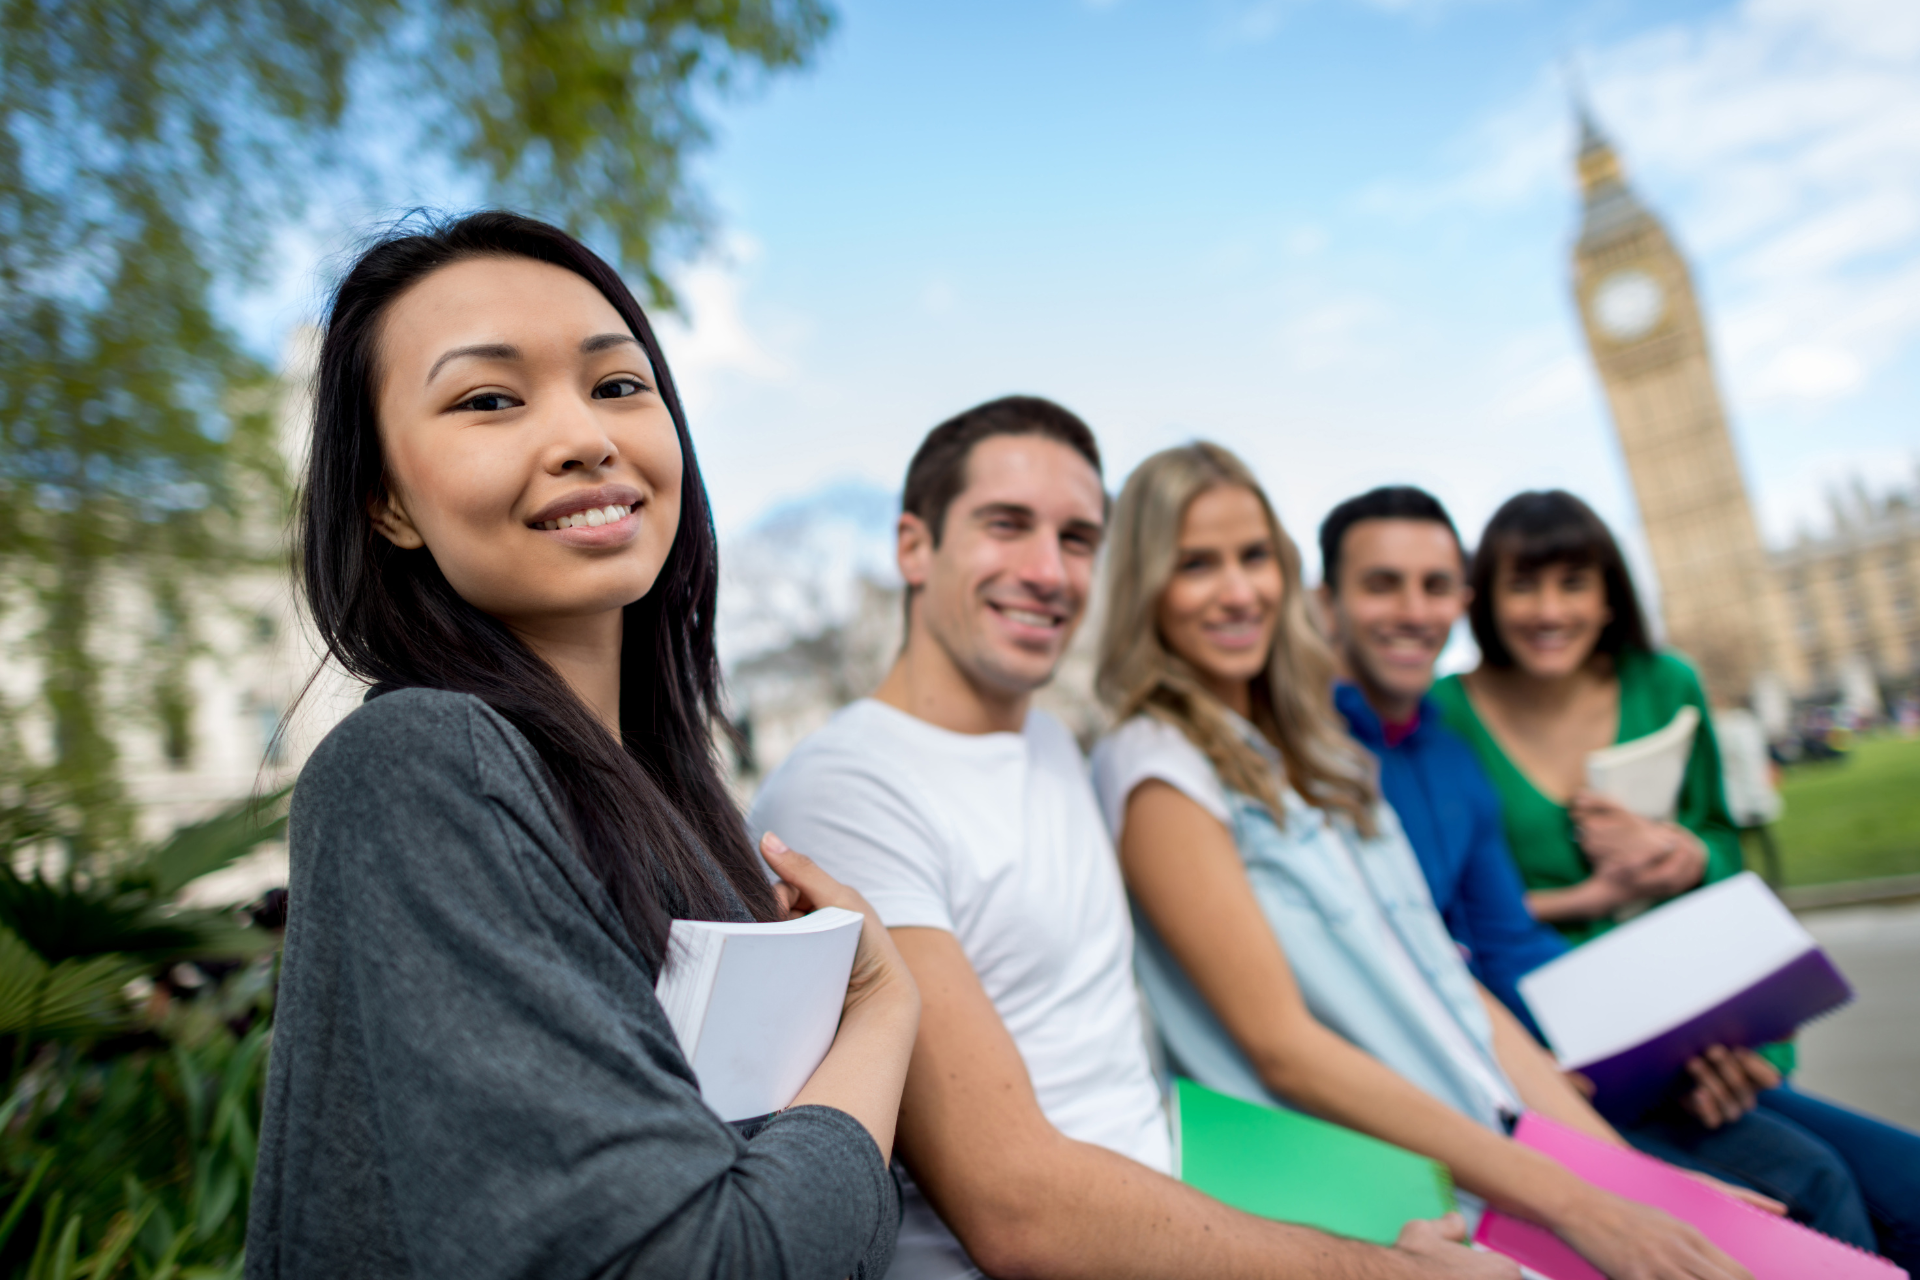 work and Study in The UK,work permit after Study in The UK,work visa after Study in The UK